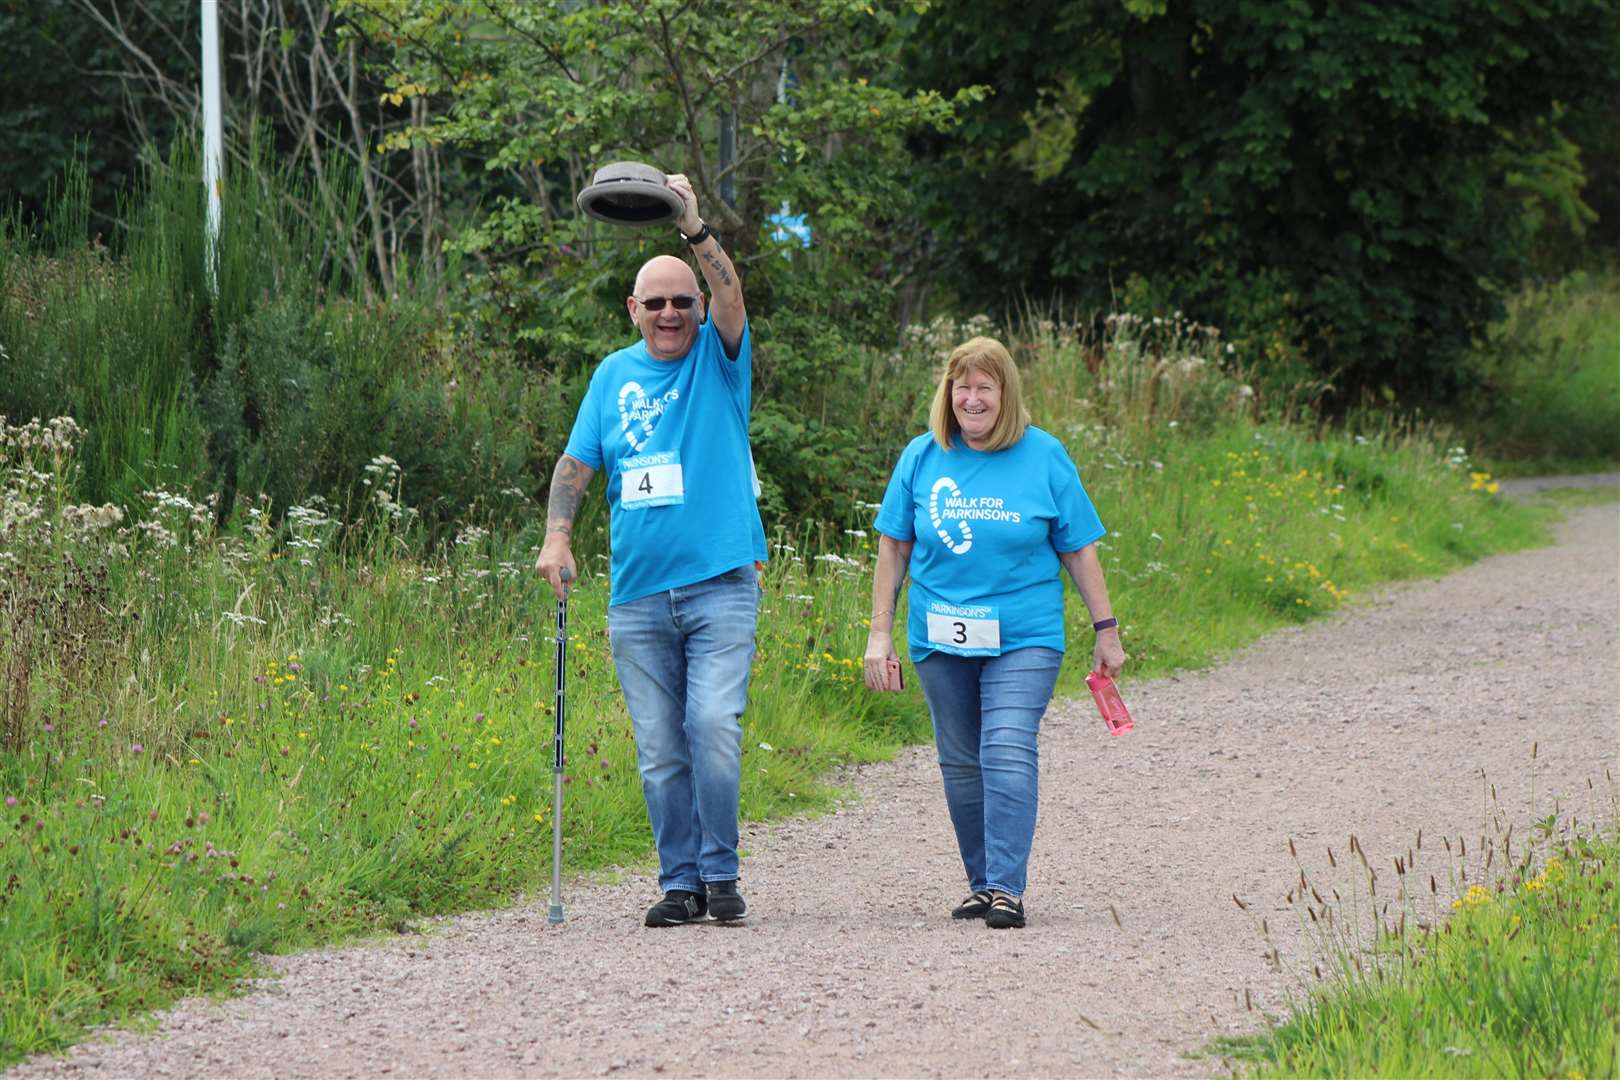 People could complete a two-mile or a six mile route along the canal path. Iain Stephen Morrison/Parkinson's UK.